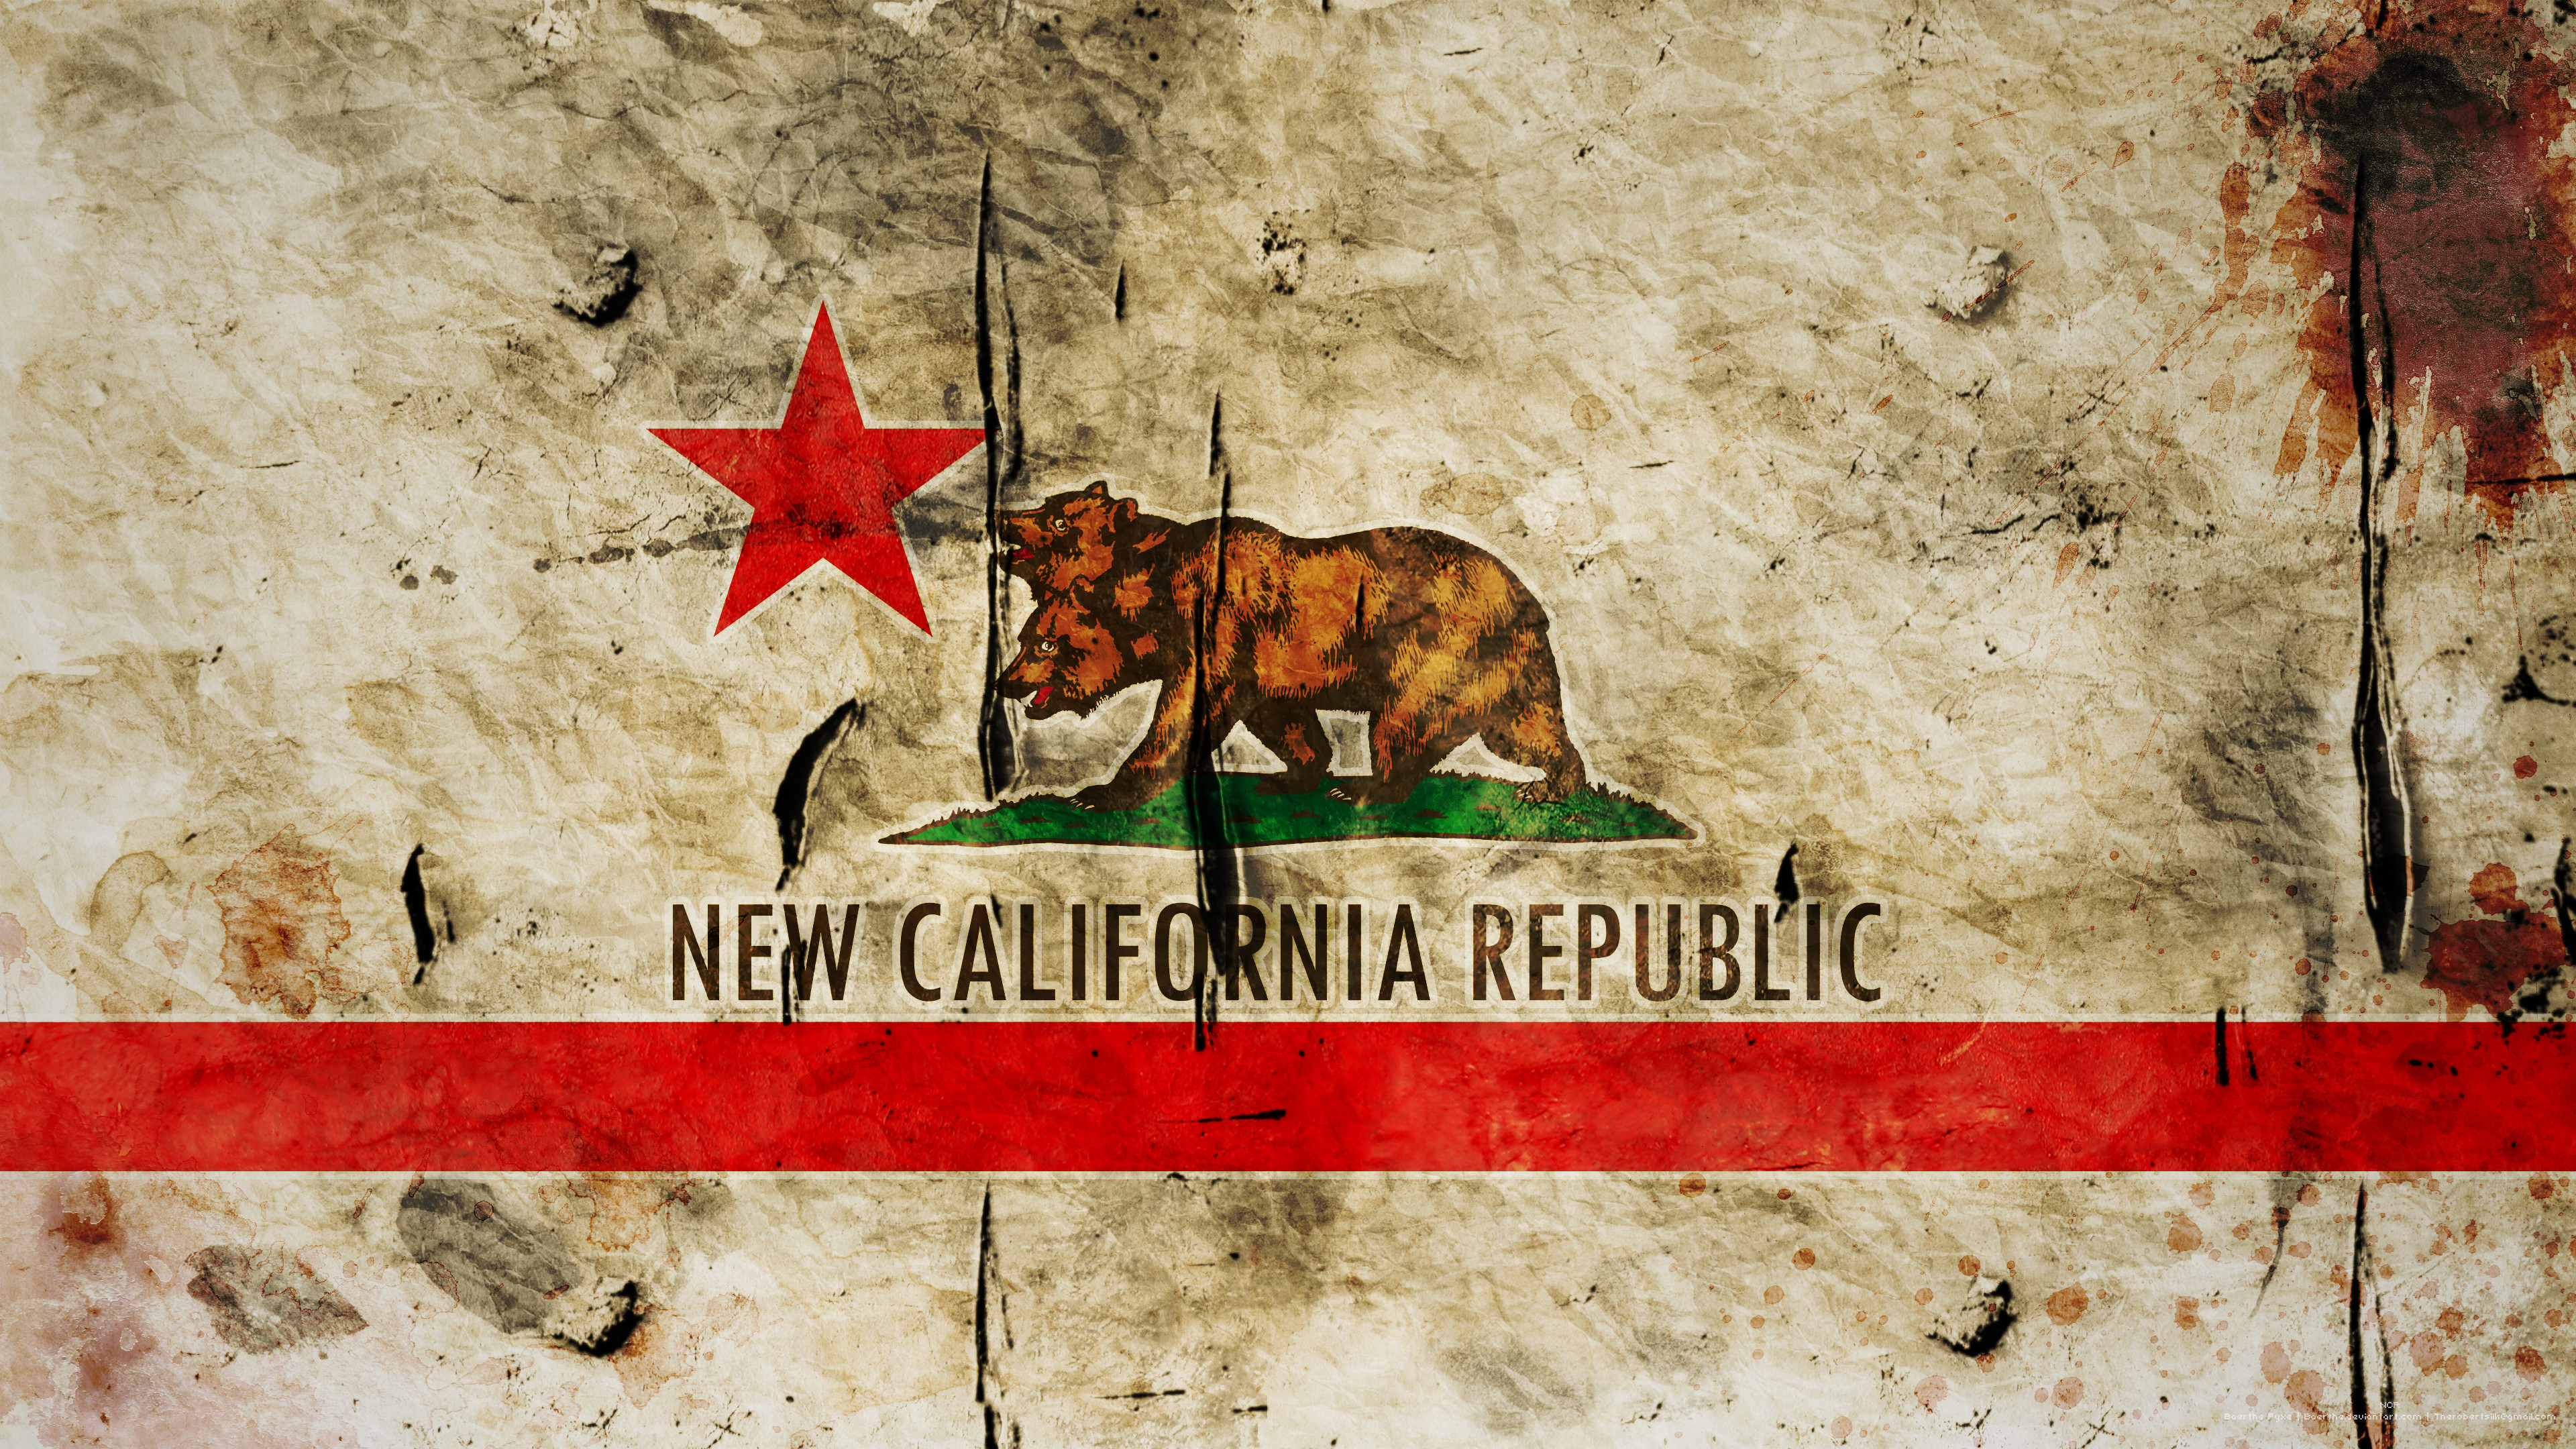 3840x2160 Free download 66 Cali Republic Wallpapers on WallpaperPlay [] for your Desktop, Mobile \u0026 Tablet | Explore 35+ New California Wallpapers | New California Wallpapers, New California Republic Wallpaper, California Beaches Wallpaper